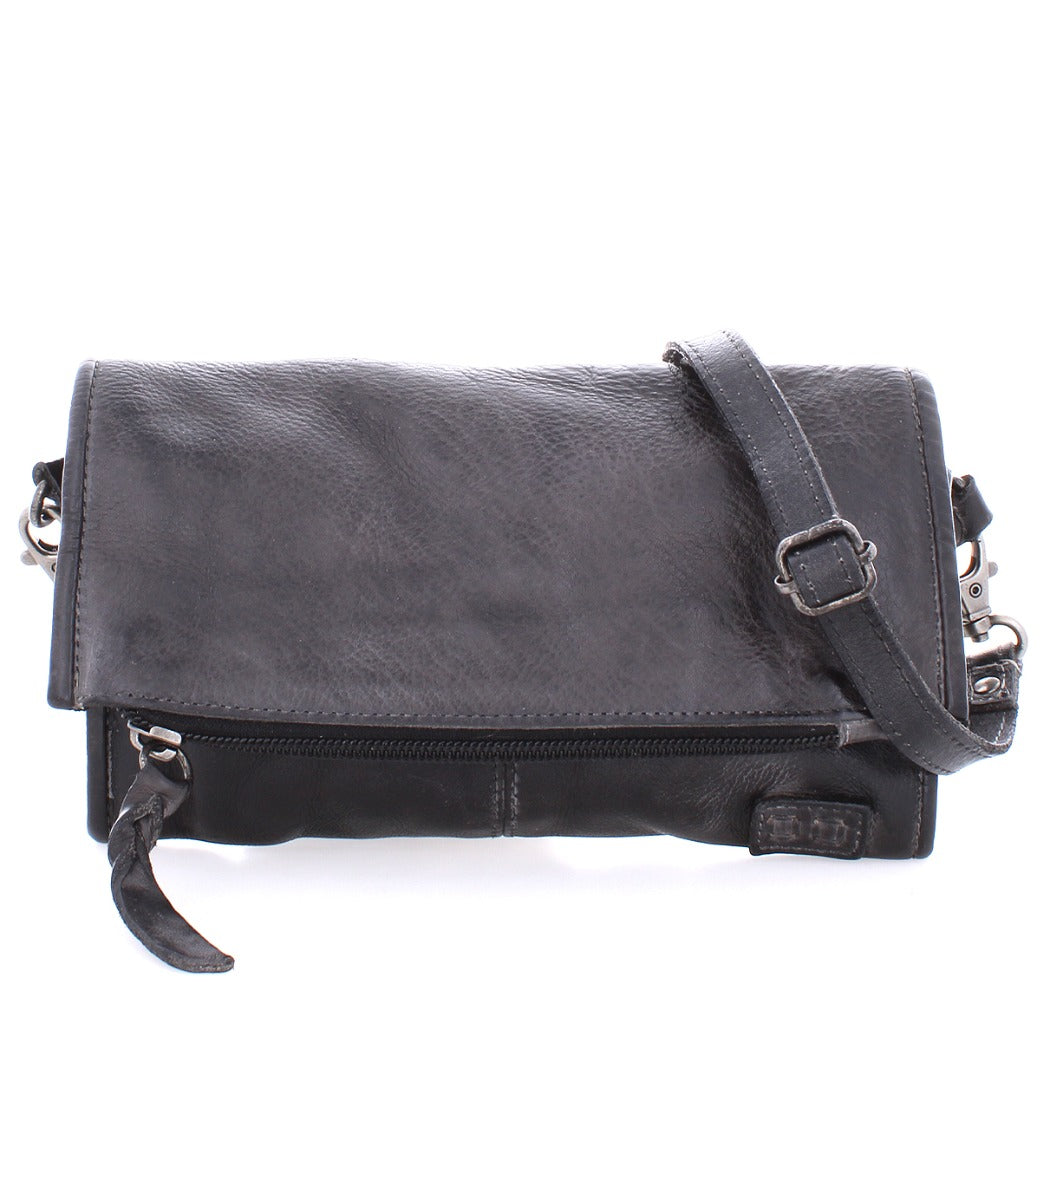 Bed Stu's Amina black leather cross body bag with an adjustable strap.